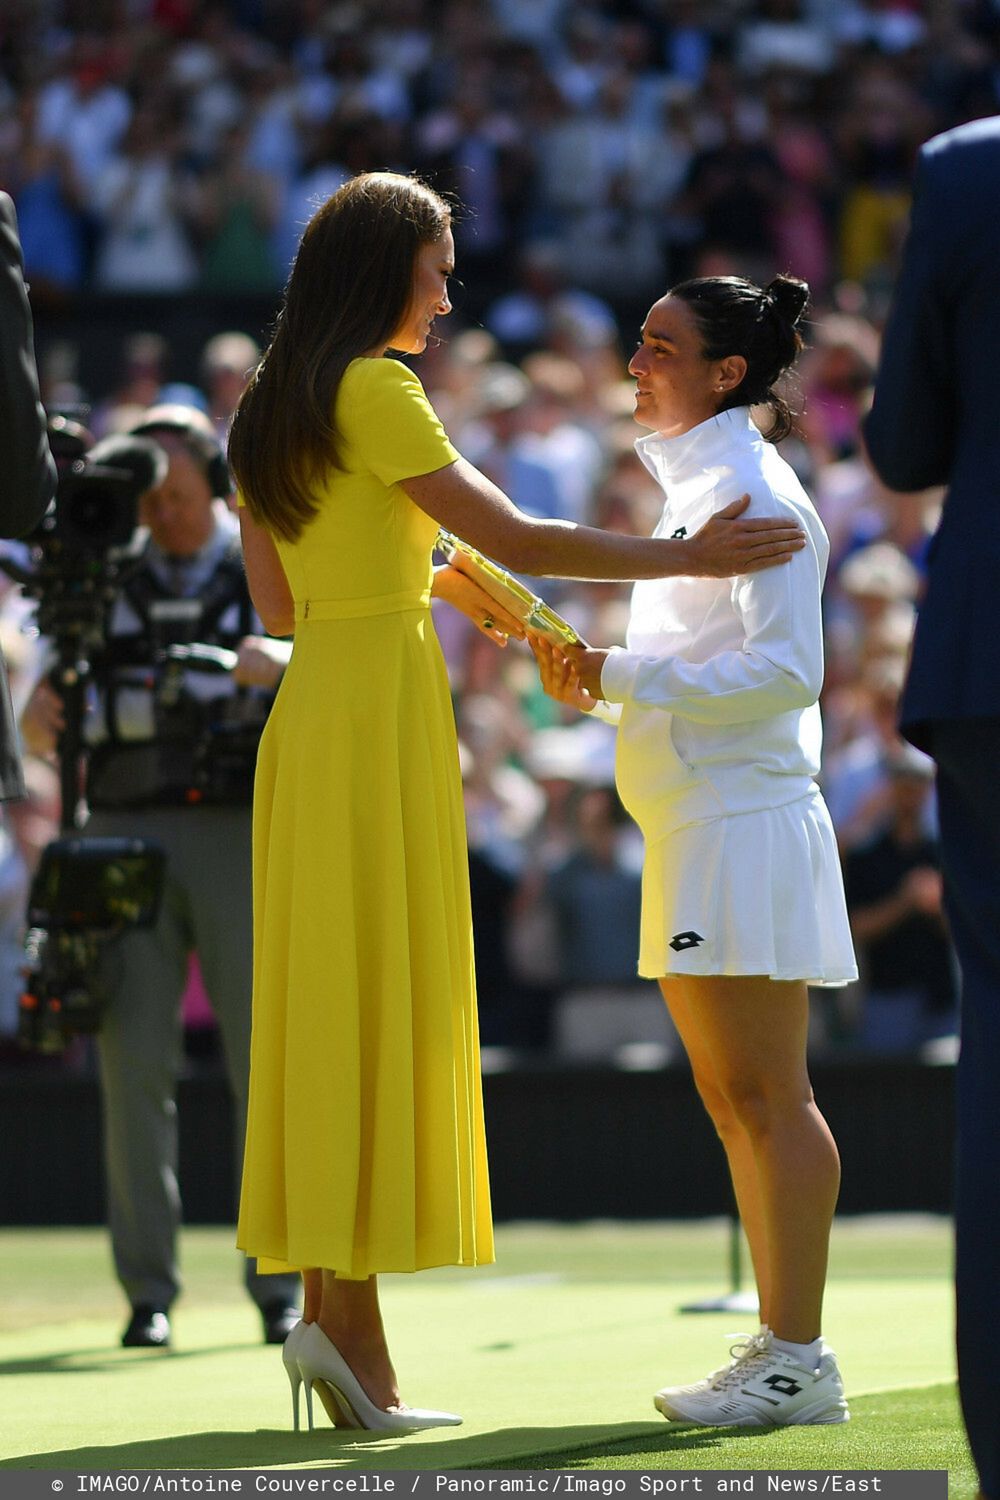 Ons Jabeur Tun receiving trophy from Kate Middleton in the womens final at Wimbledon TENNIS : Wimbledon 2022 : 09/07/2022 AntoineCouvercelle/Panoramic PUBLICATIONxNOTxINxFRAxITAxBEL